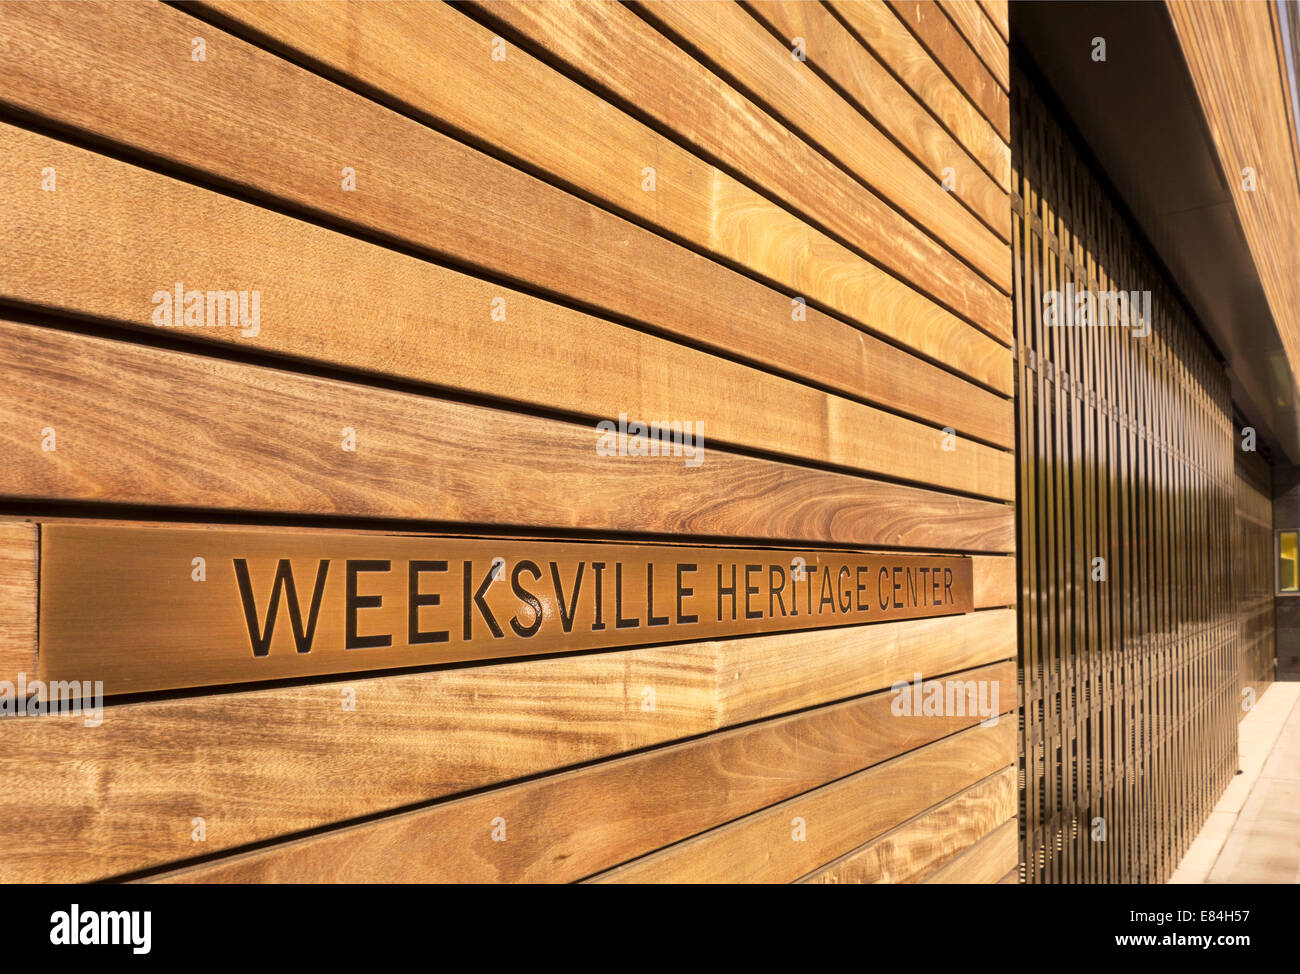 Weeksville heritage center in Brooklyn NY Stock Photo